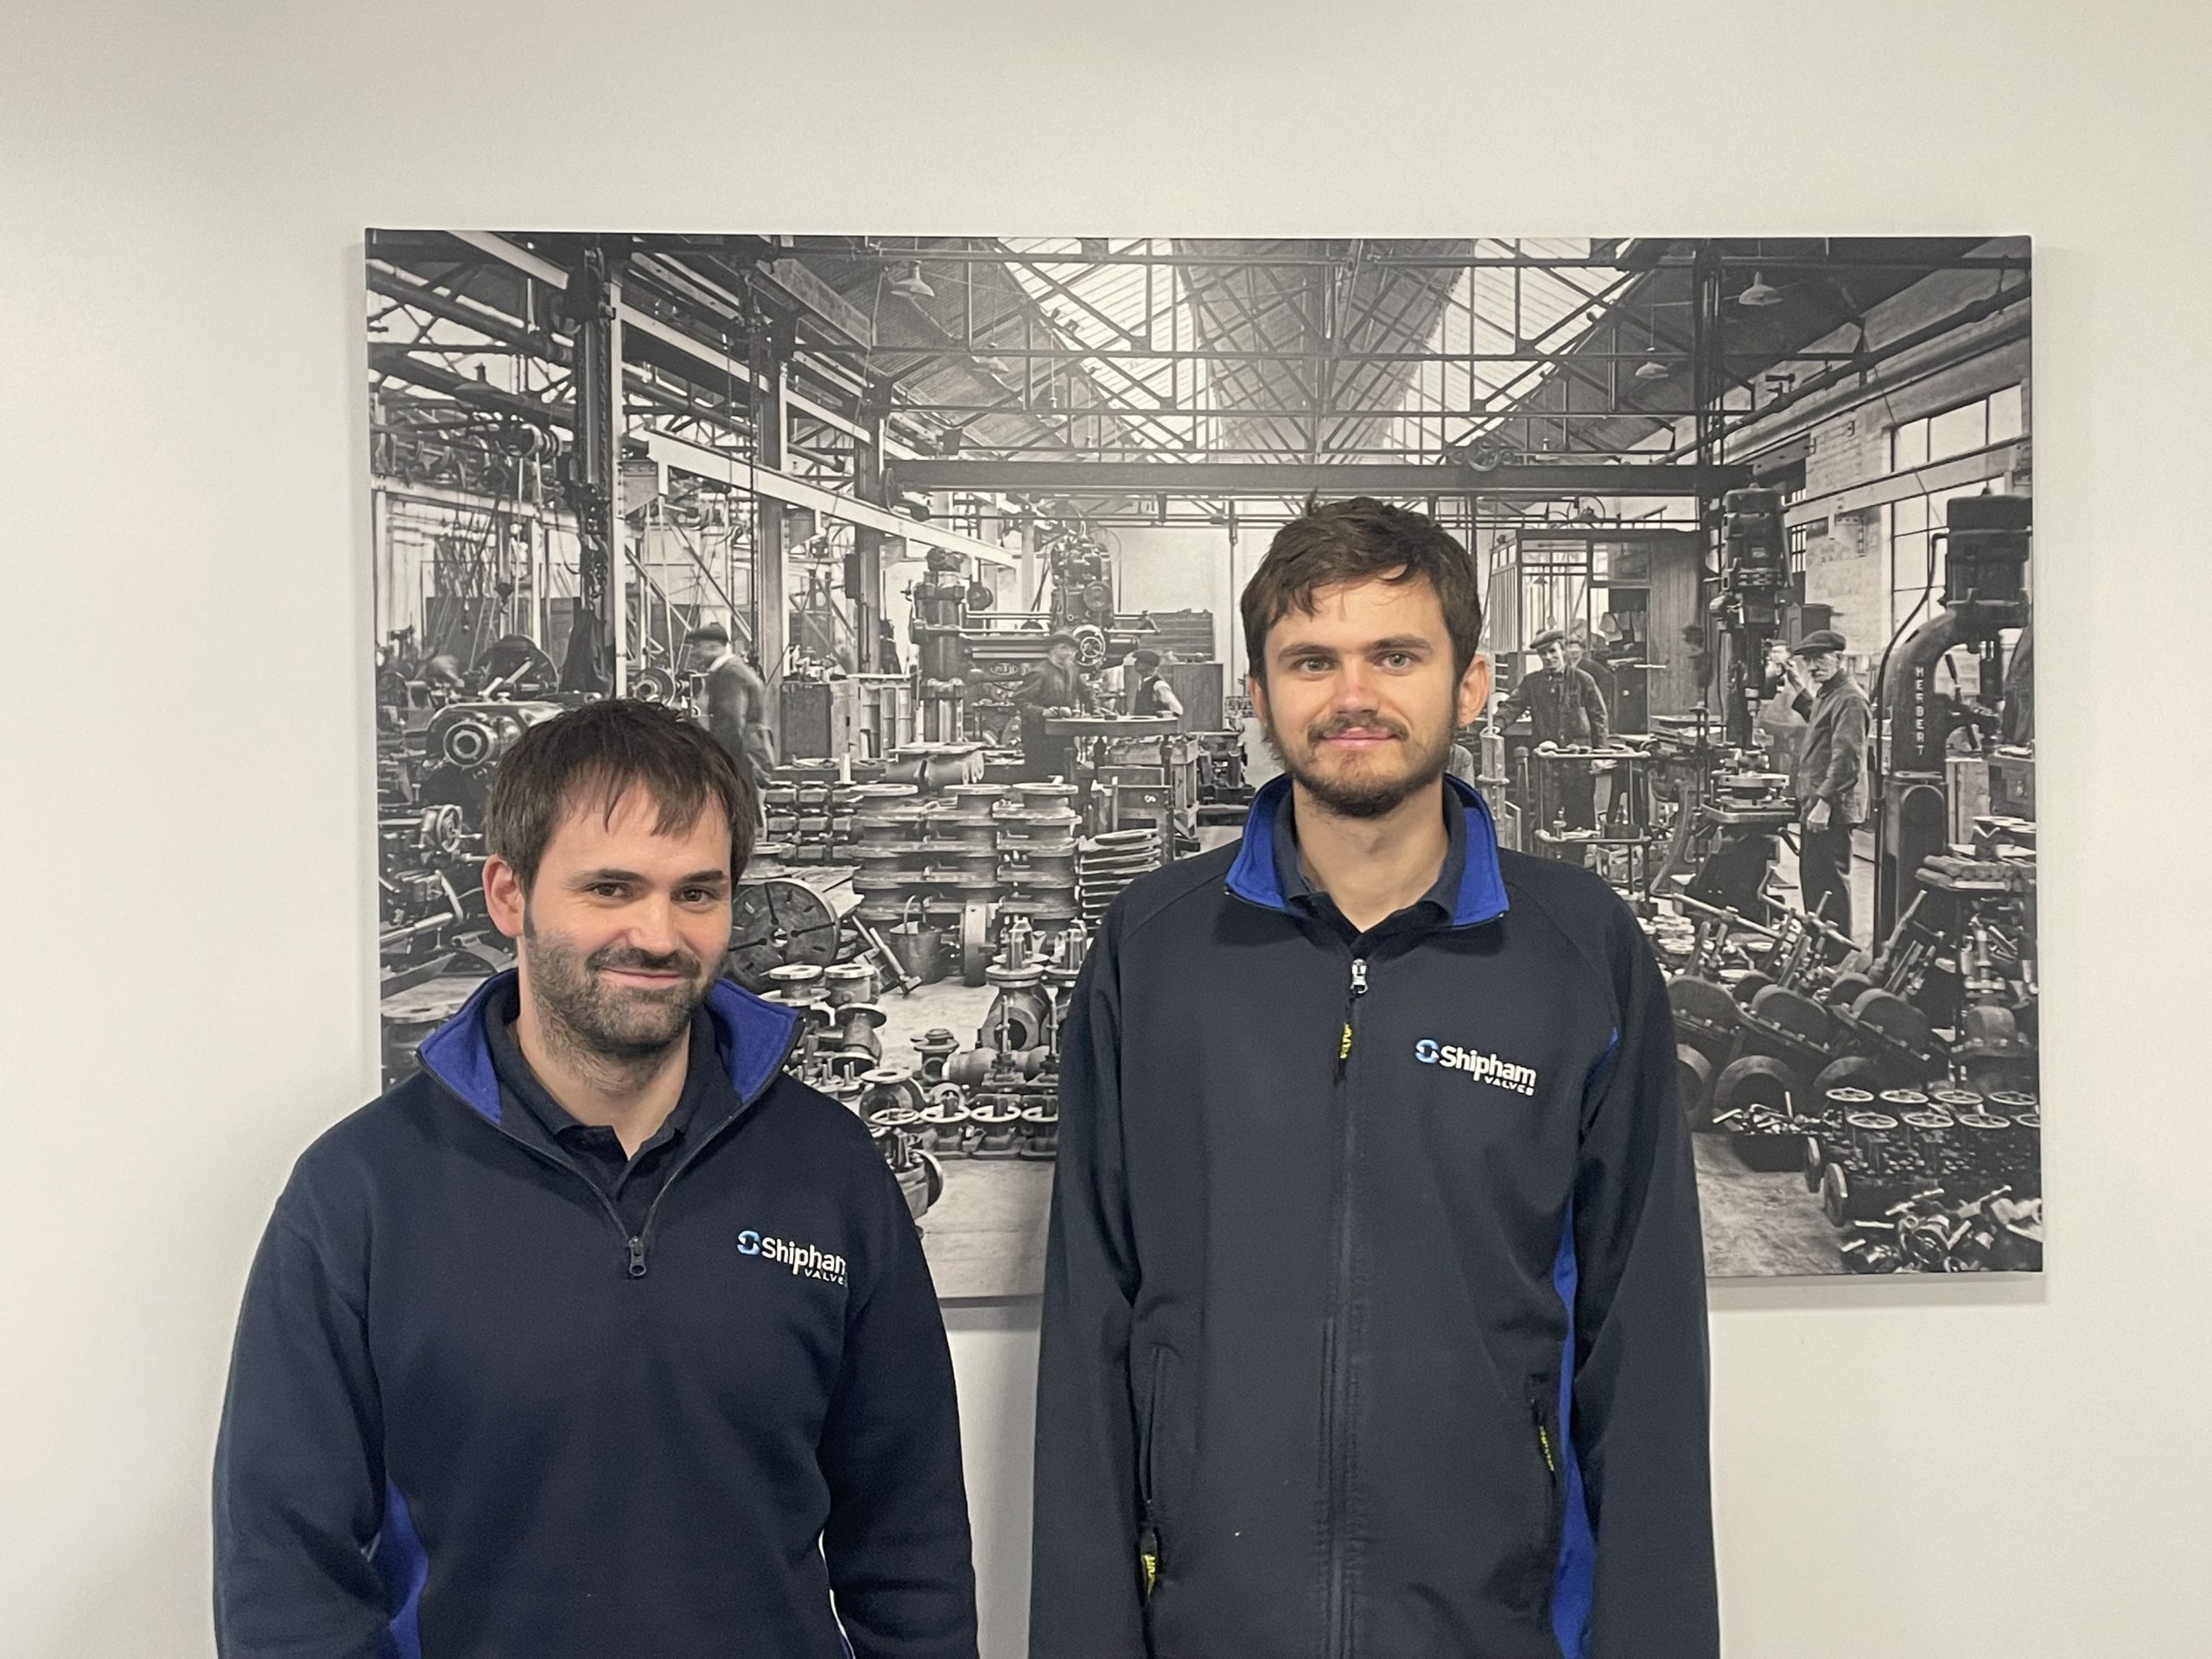 Jack Allanson is promoted to design engineer role at Shipham Valves